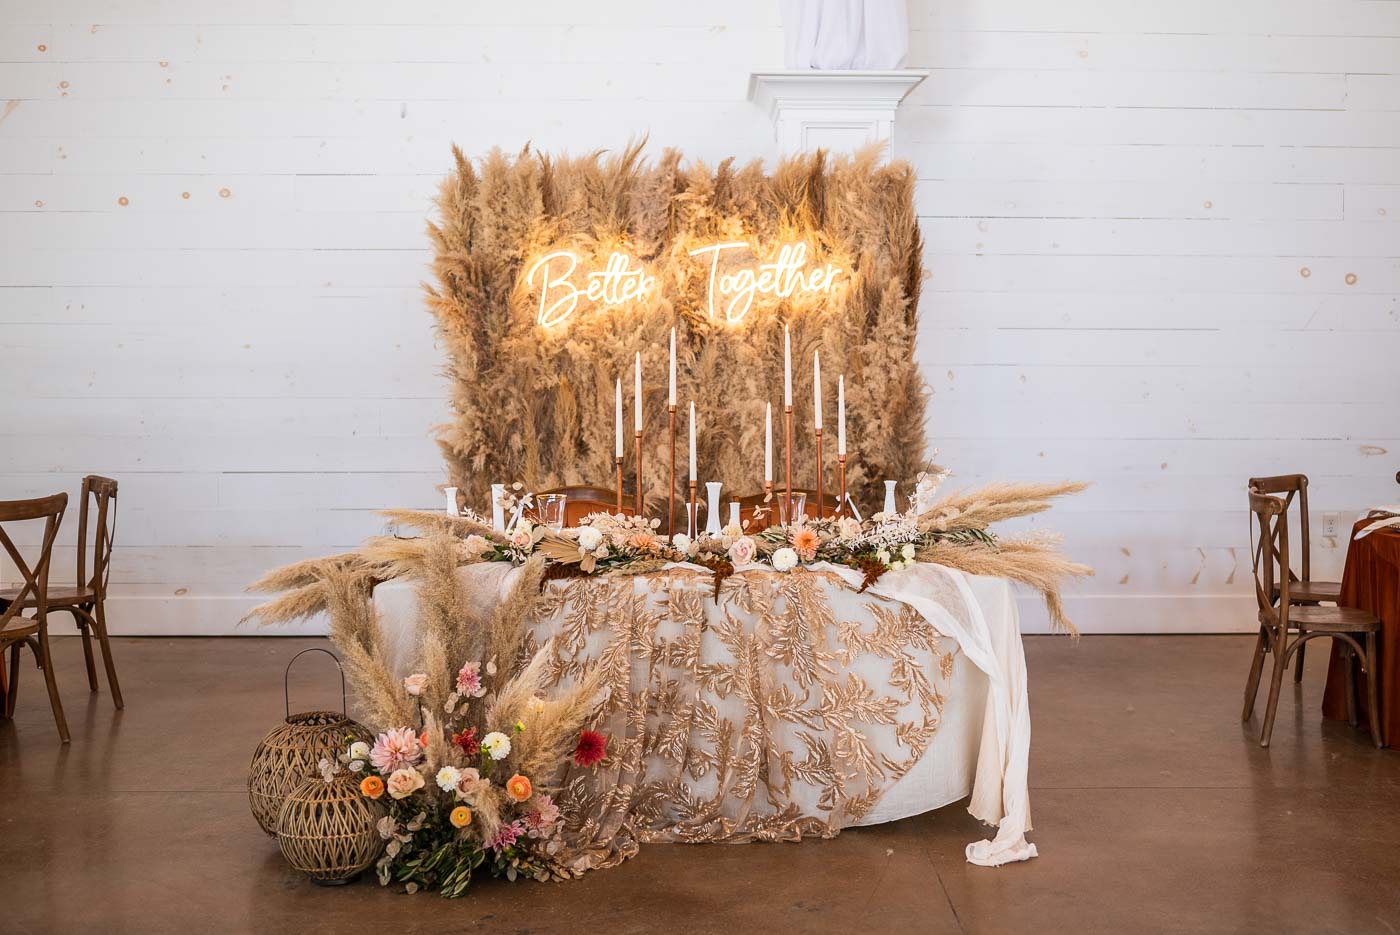 Sweatheart table with pampas grass backdrop and Better Together sign